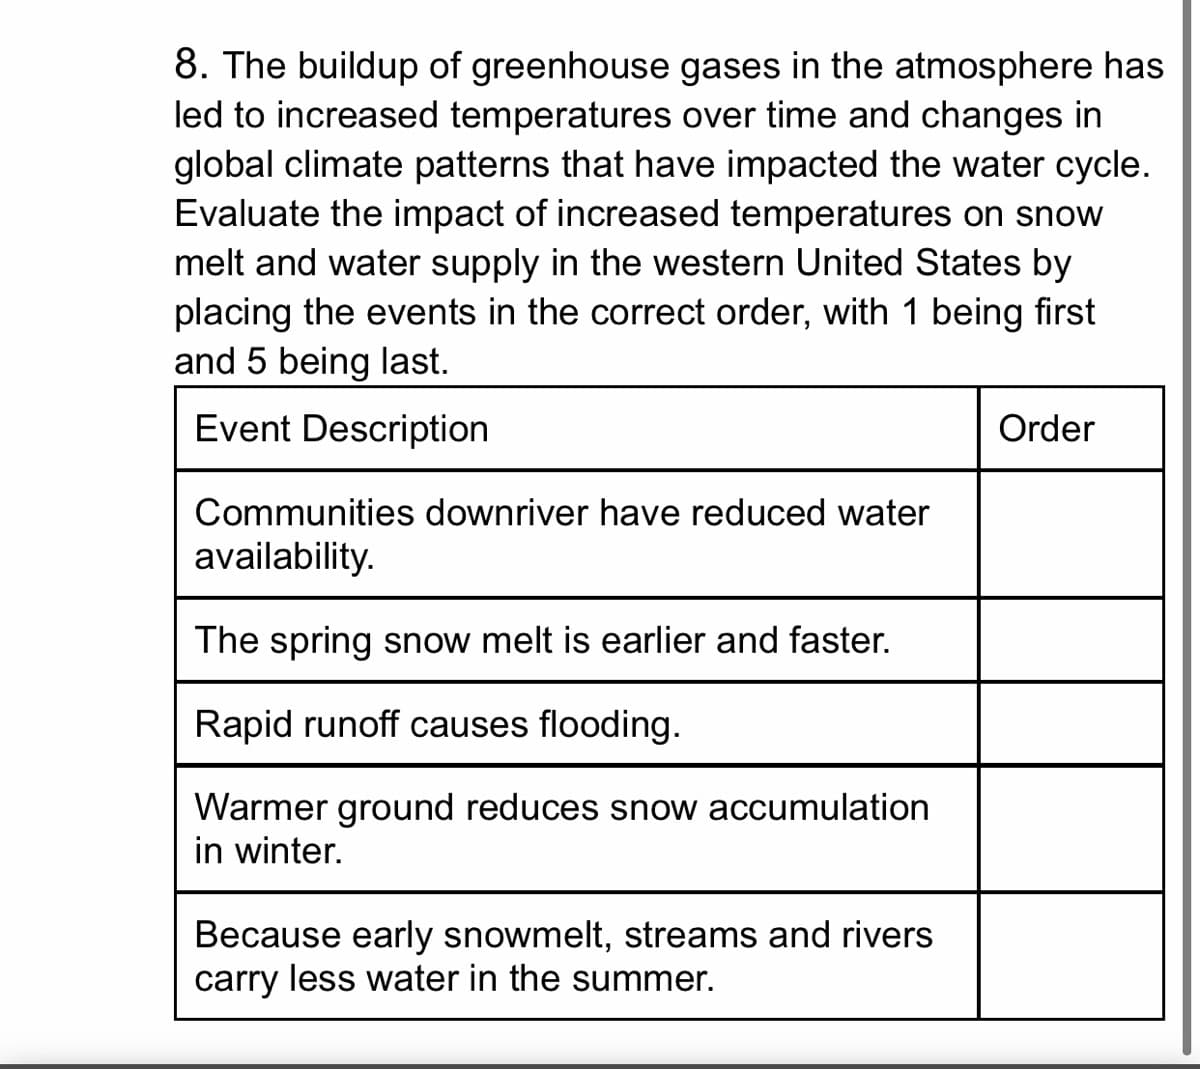 8. The buildup of greenhouse gases in the atmosphere has
led to increased temperatures over time and changes in
global climate patterns that have impacted the water cycle.
Evaluate the impact of increased temperatures on snow
melt and water supply in the western United States by
placing the events in the correct order, with 1 being first
and 5 being last.
Event Description
Order
Communities downriver have reduced water
availability.
The spring snow melt is earlier and faster.
Rapid runoff causes flooding.
Warmer ground reduces snow accumulation
in winter.
Because early snowmelt, streams and rivers
carry less water in the summer.
